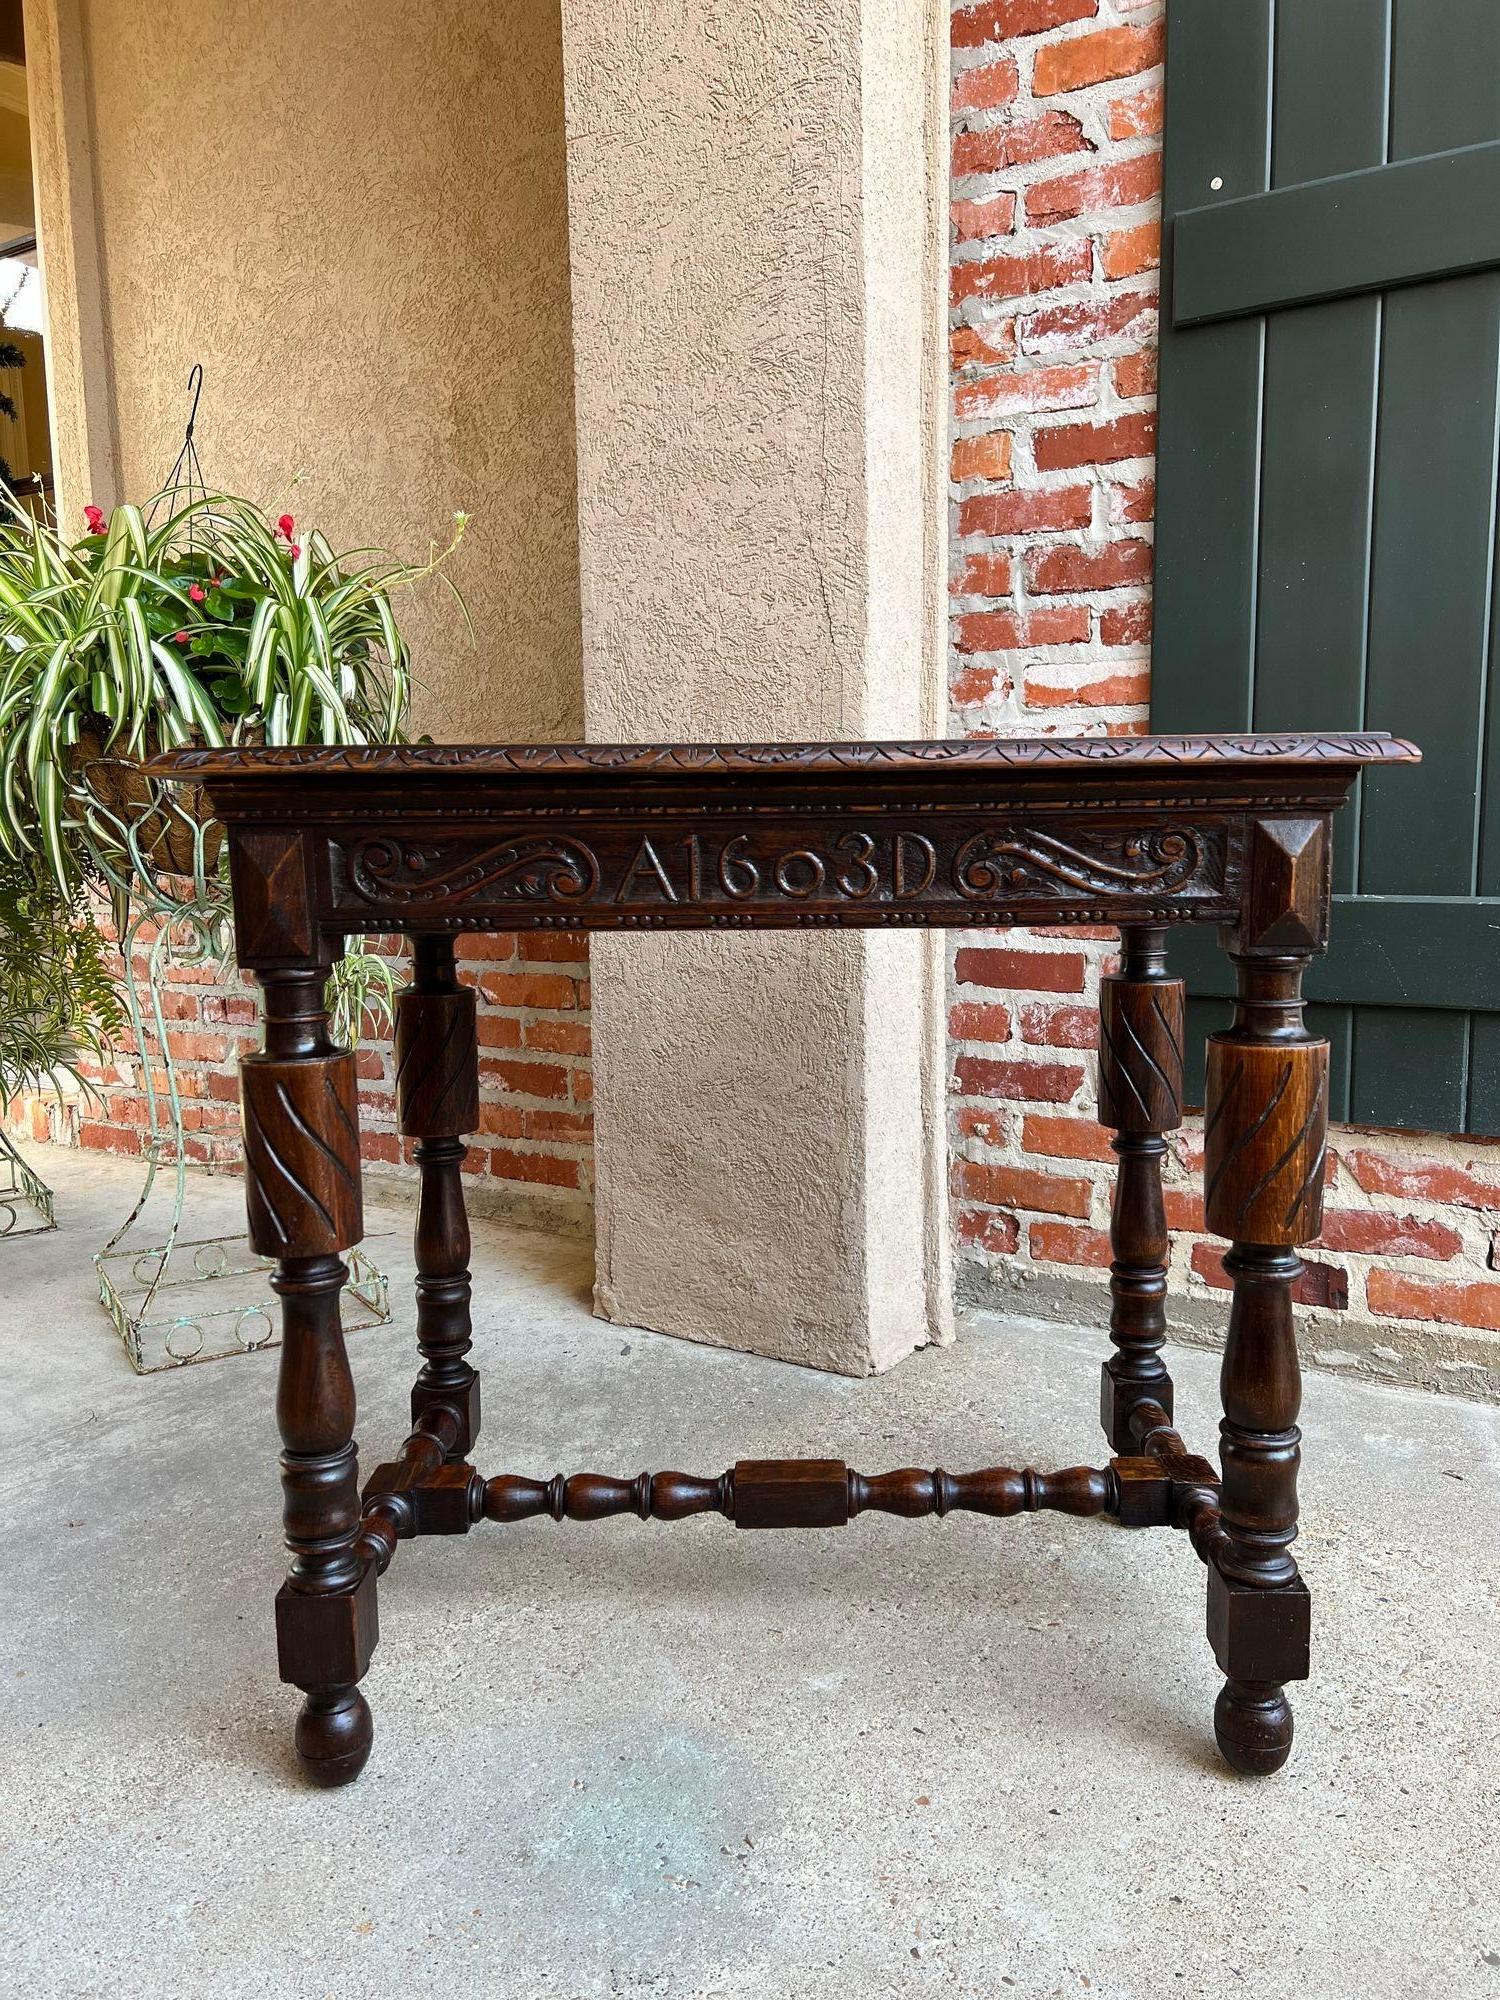 Antique English carved oak hall sofa table British Tudor c1900.

 Direct from England, a very highly carved and elegant antique English hall table in a perfect size for anywhere from your foyer to sofa to bedside!
A striking silhouette, defined